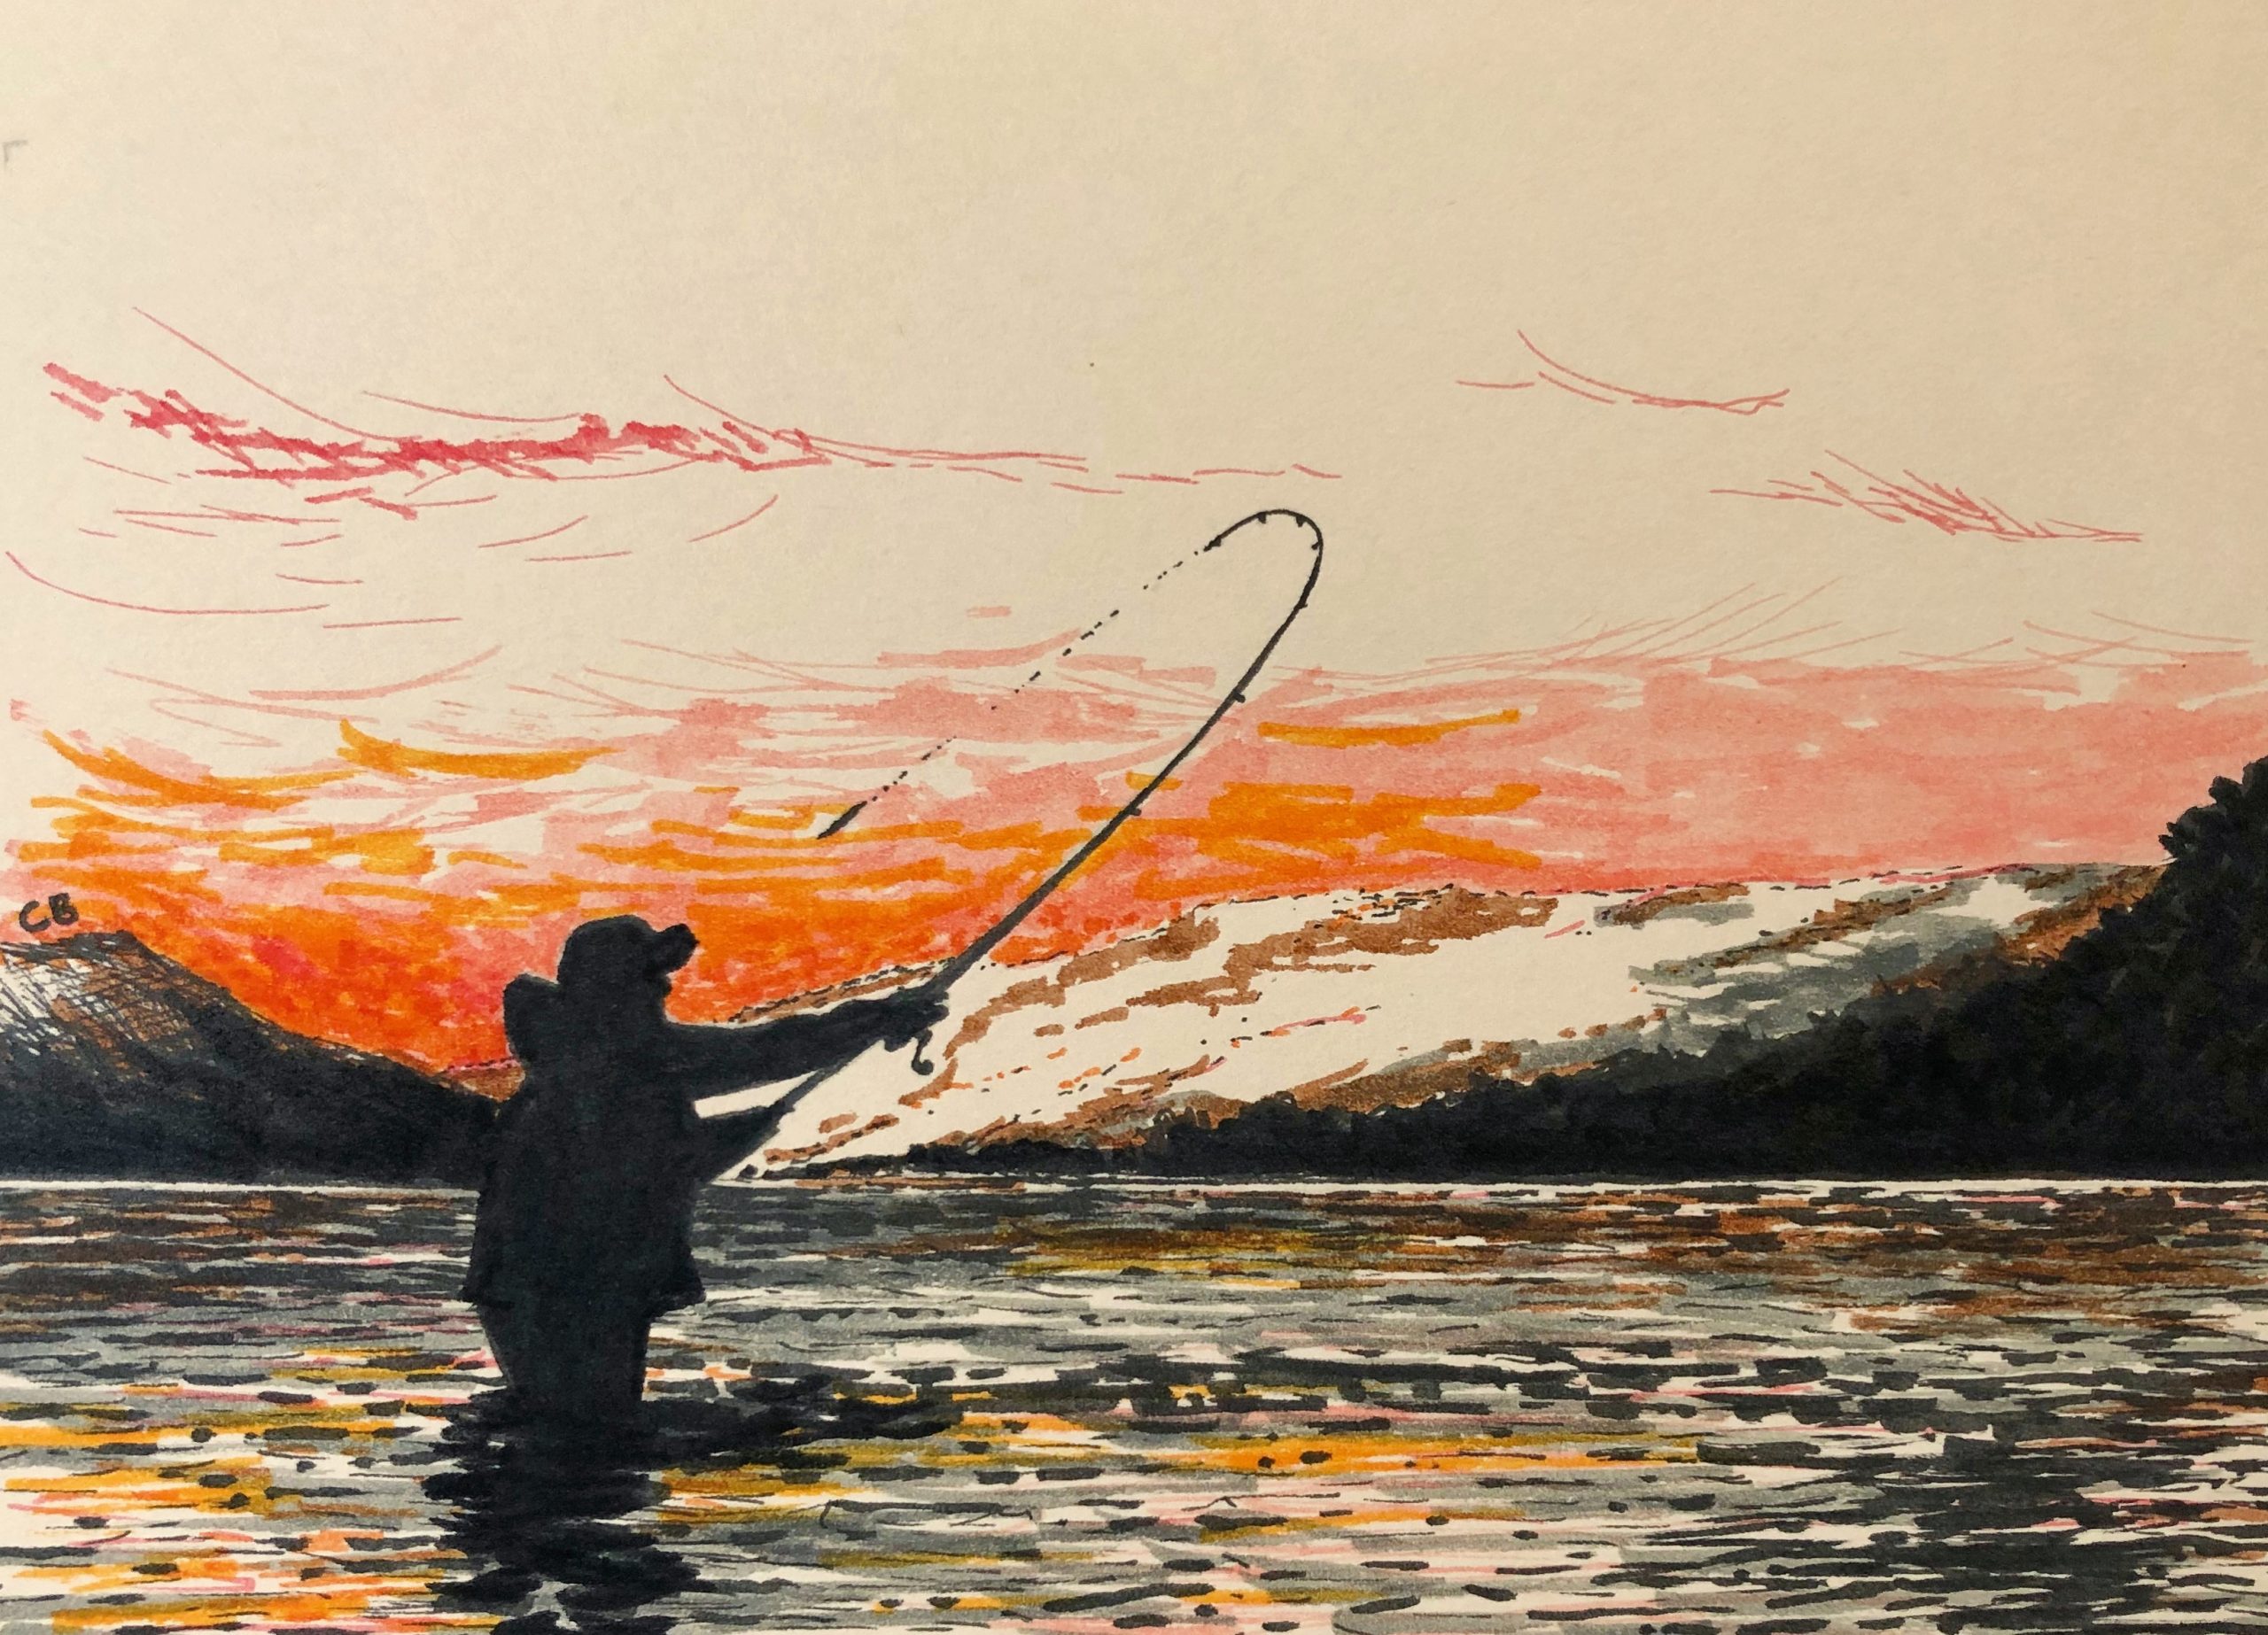 Pen and marker drawing of a fisherman in a river